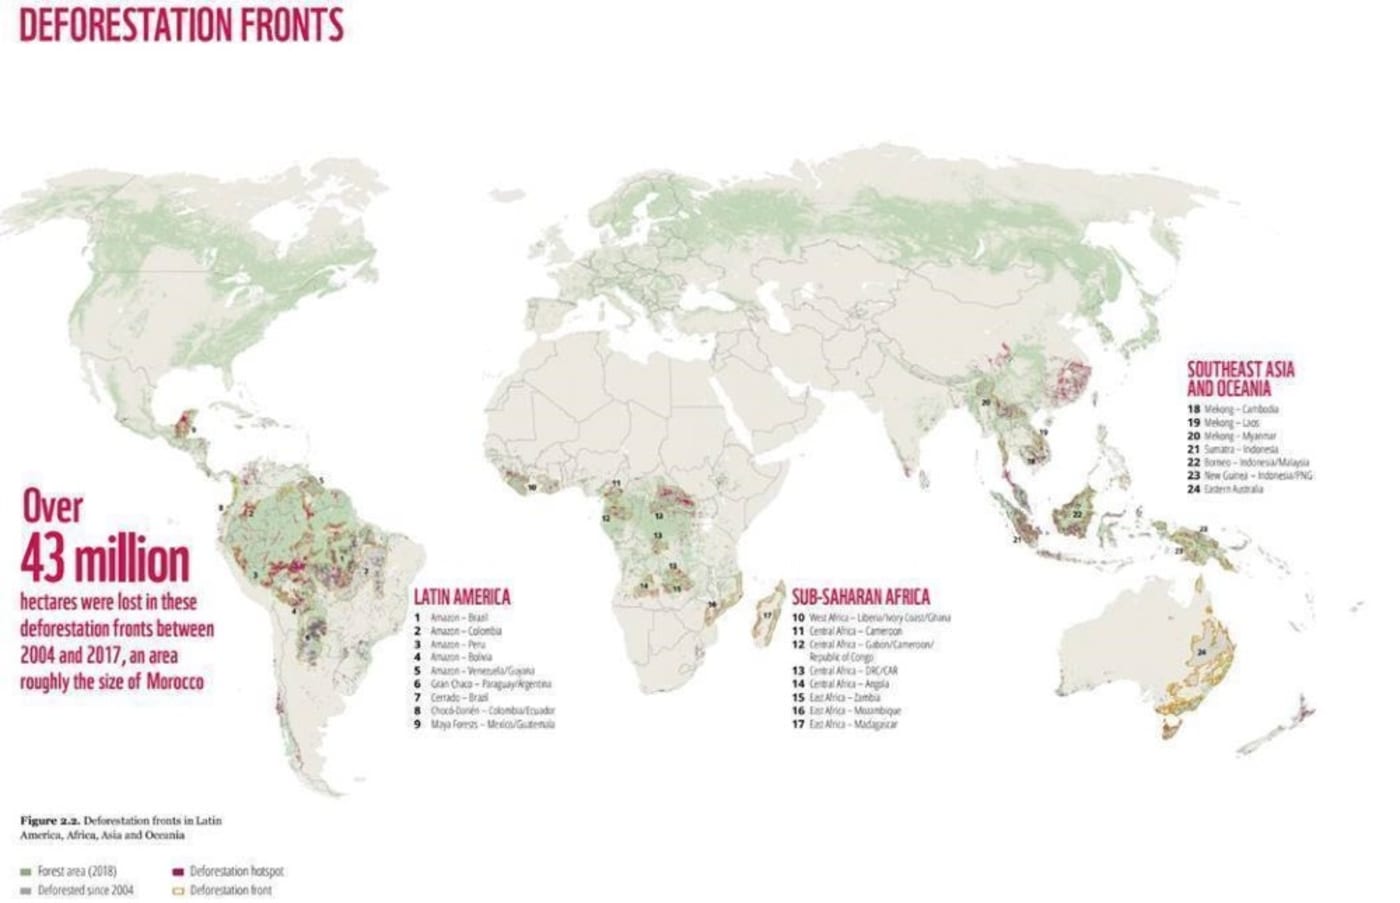 Deforestation fronts in Latin America= Africa= Asia and Oceania